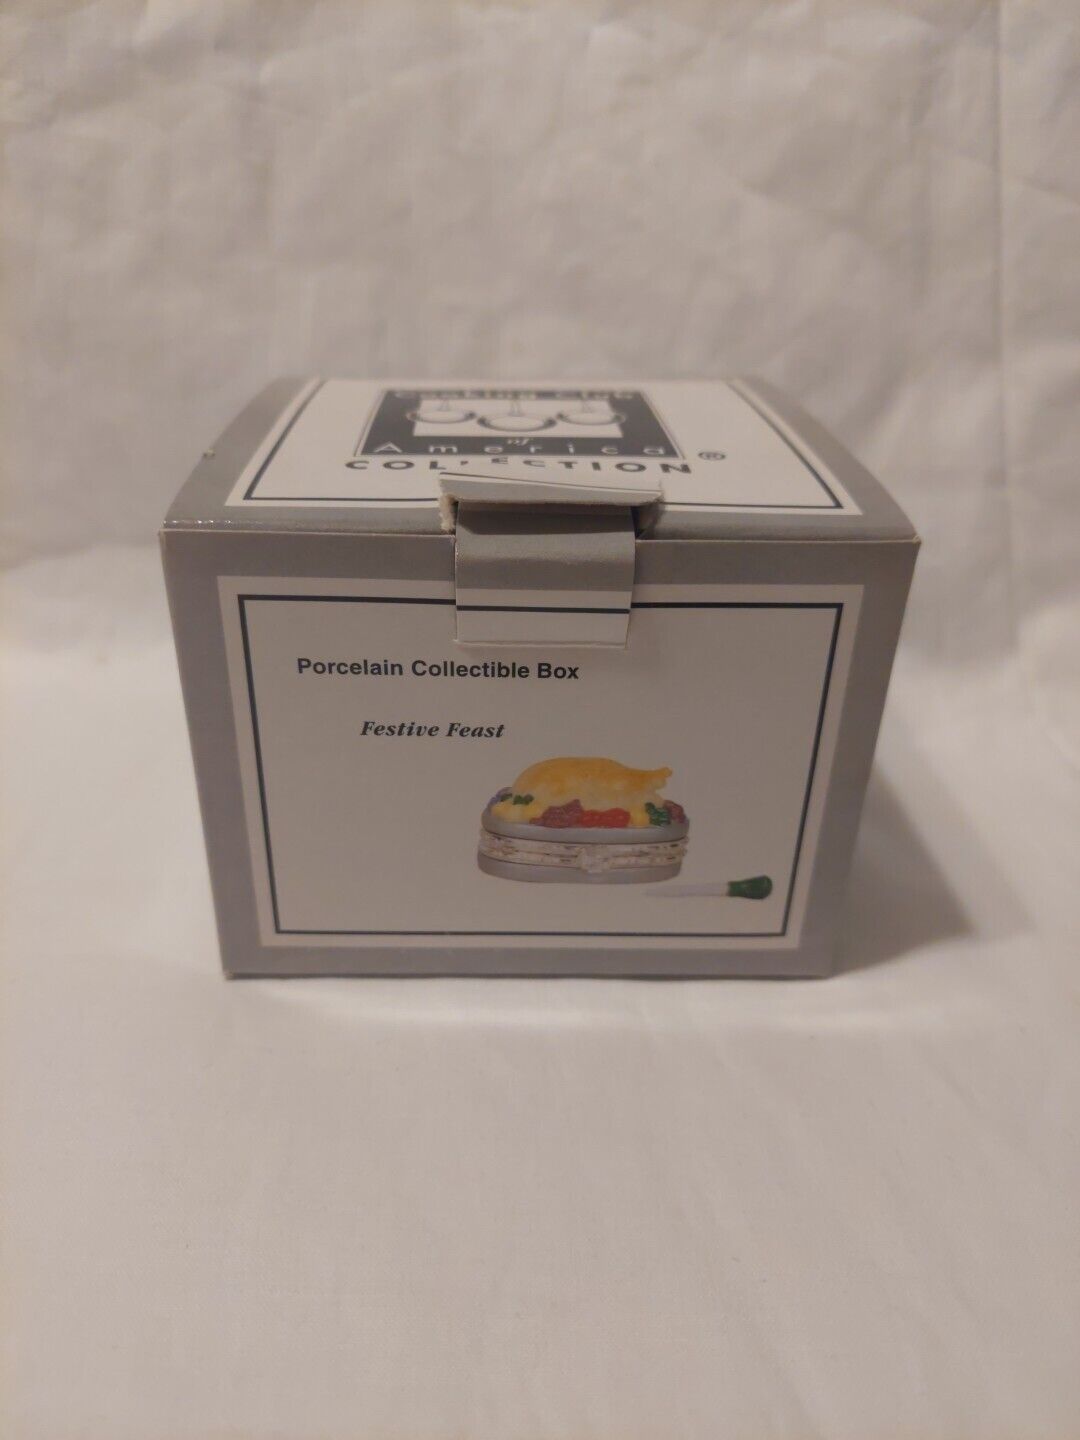 Cooking Club Of America Porcelain Collectible Box Festive Feast Hinged Box